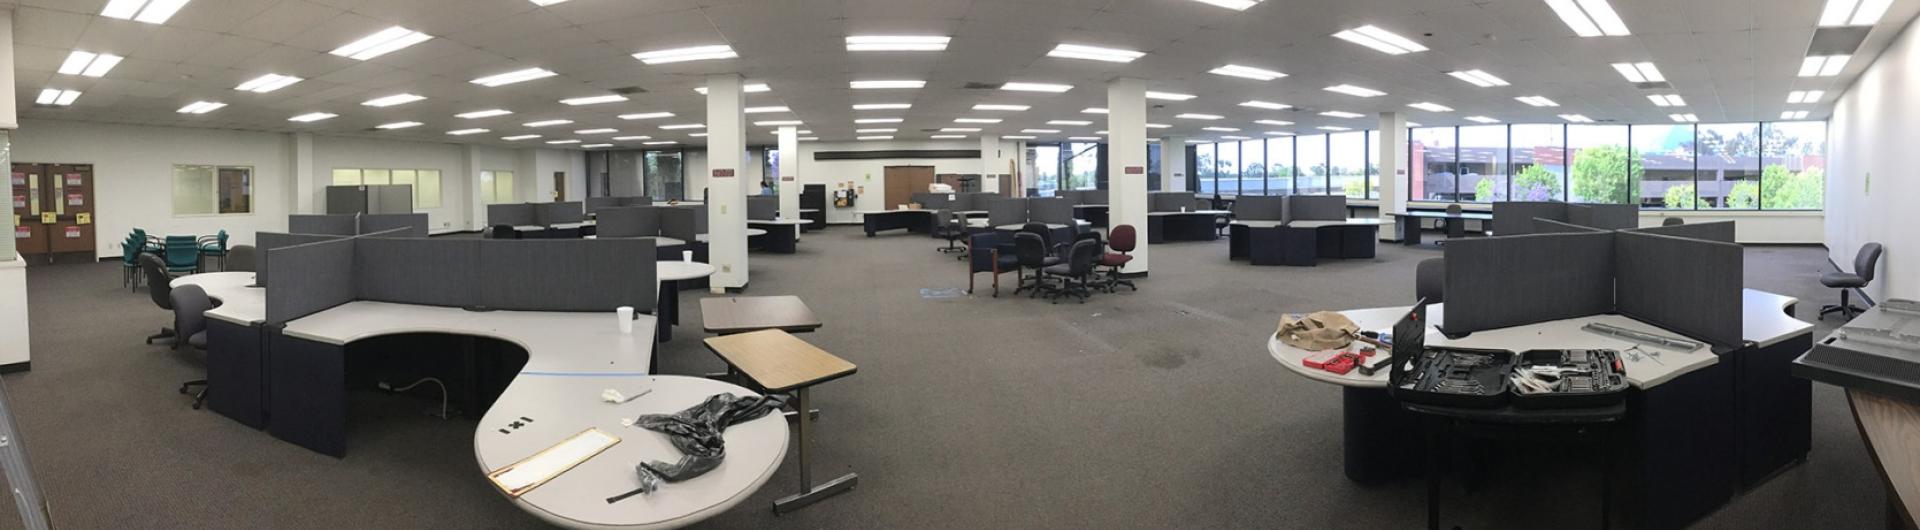 CSULB CBA Computer Lab empty ready for remodel